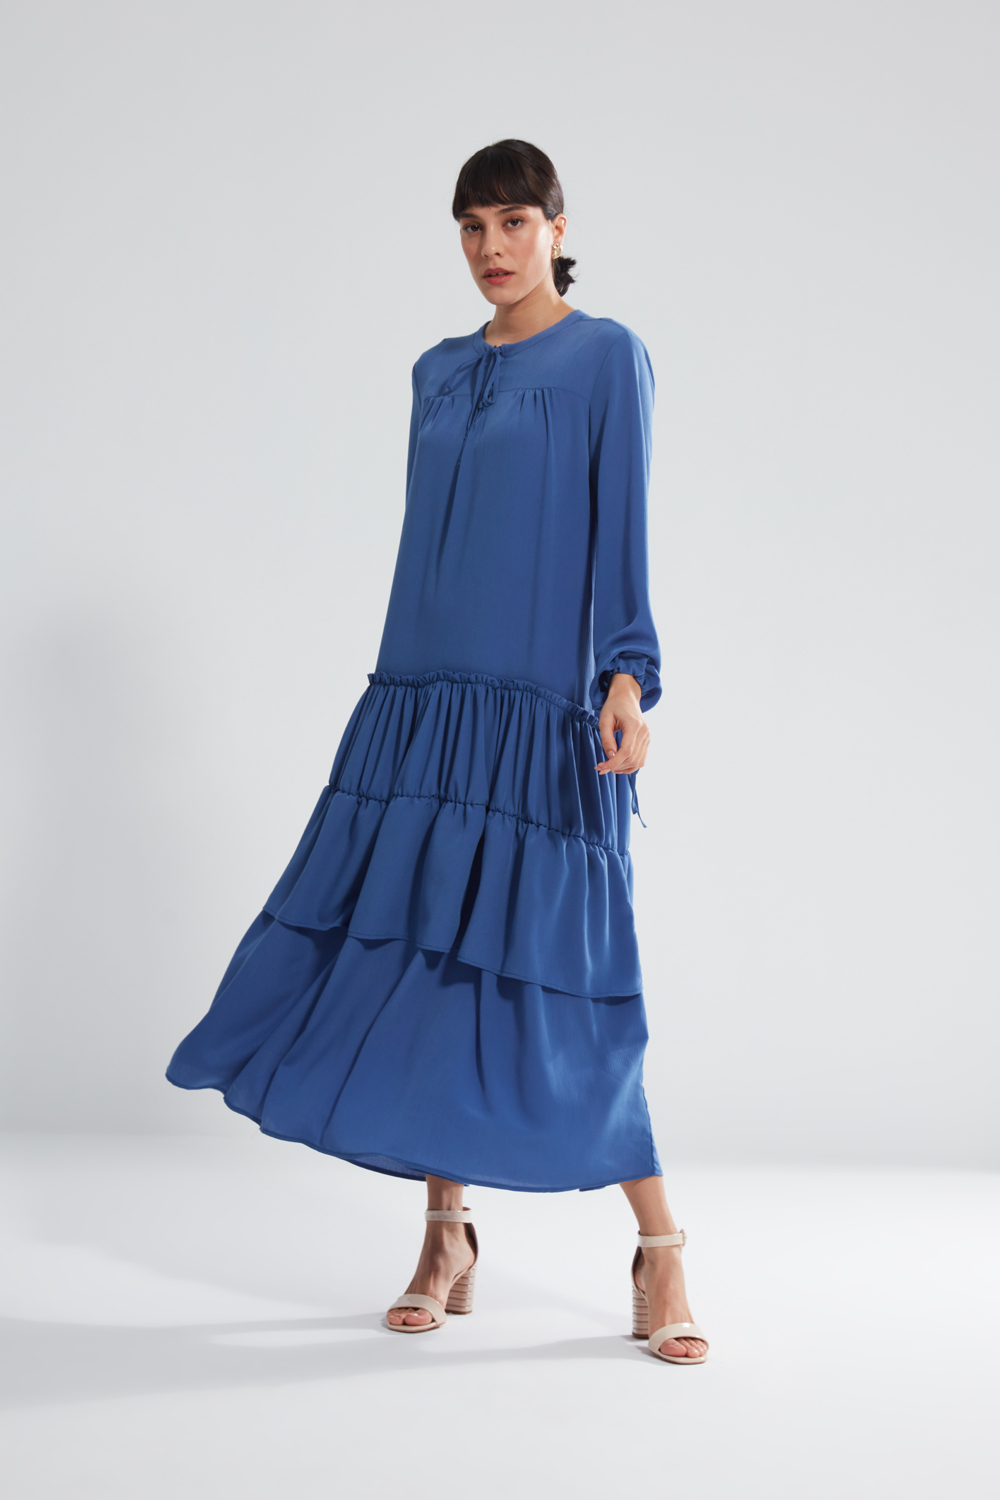 Lace Up Collar Tiered Detailed Indigo Dress